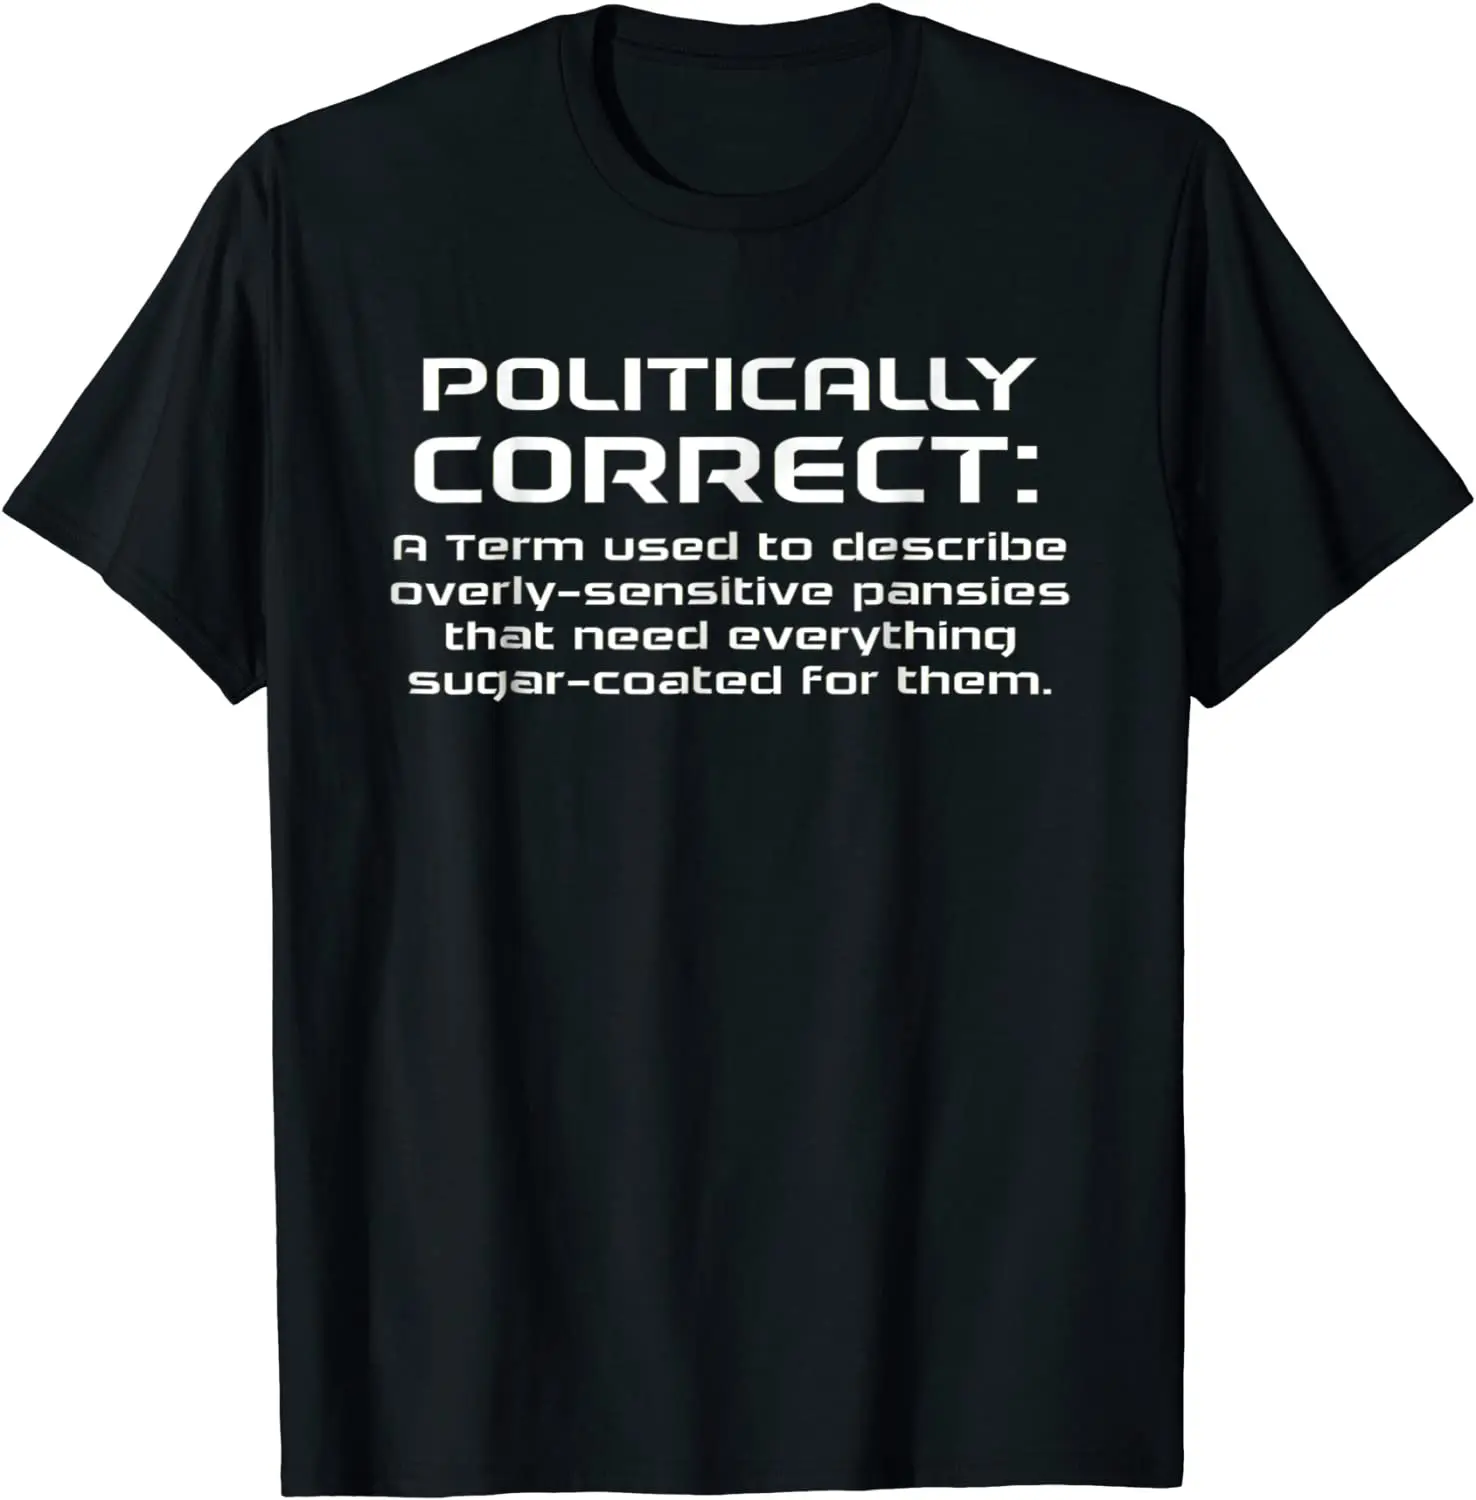 Politically Correct T-Shirt Printed On Group Tops Tees Brand Cotton Men T Shirt